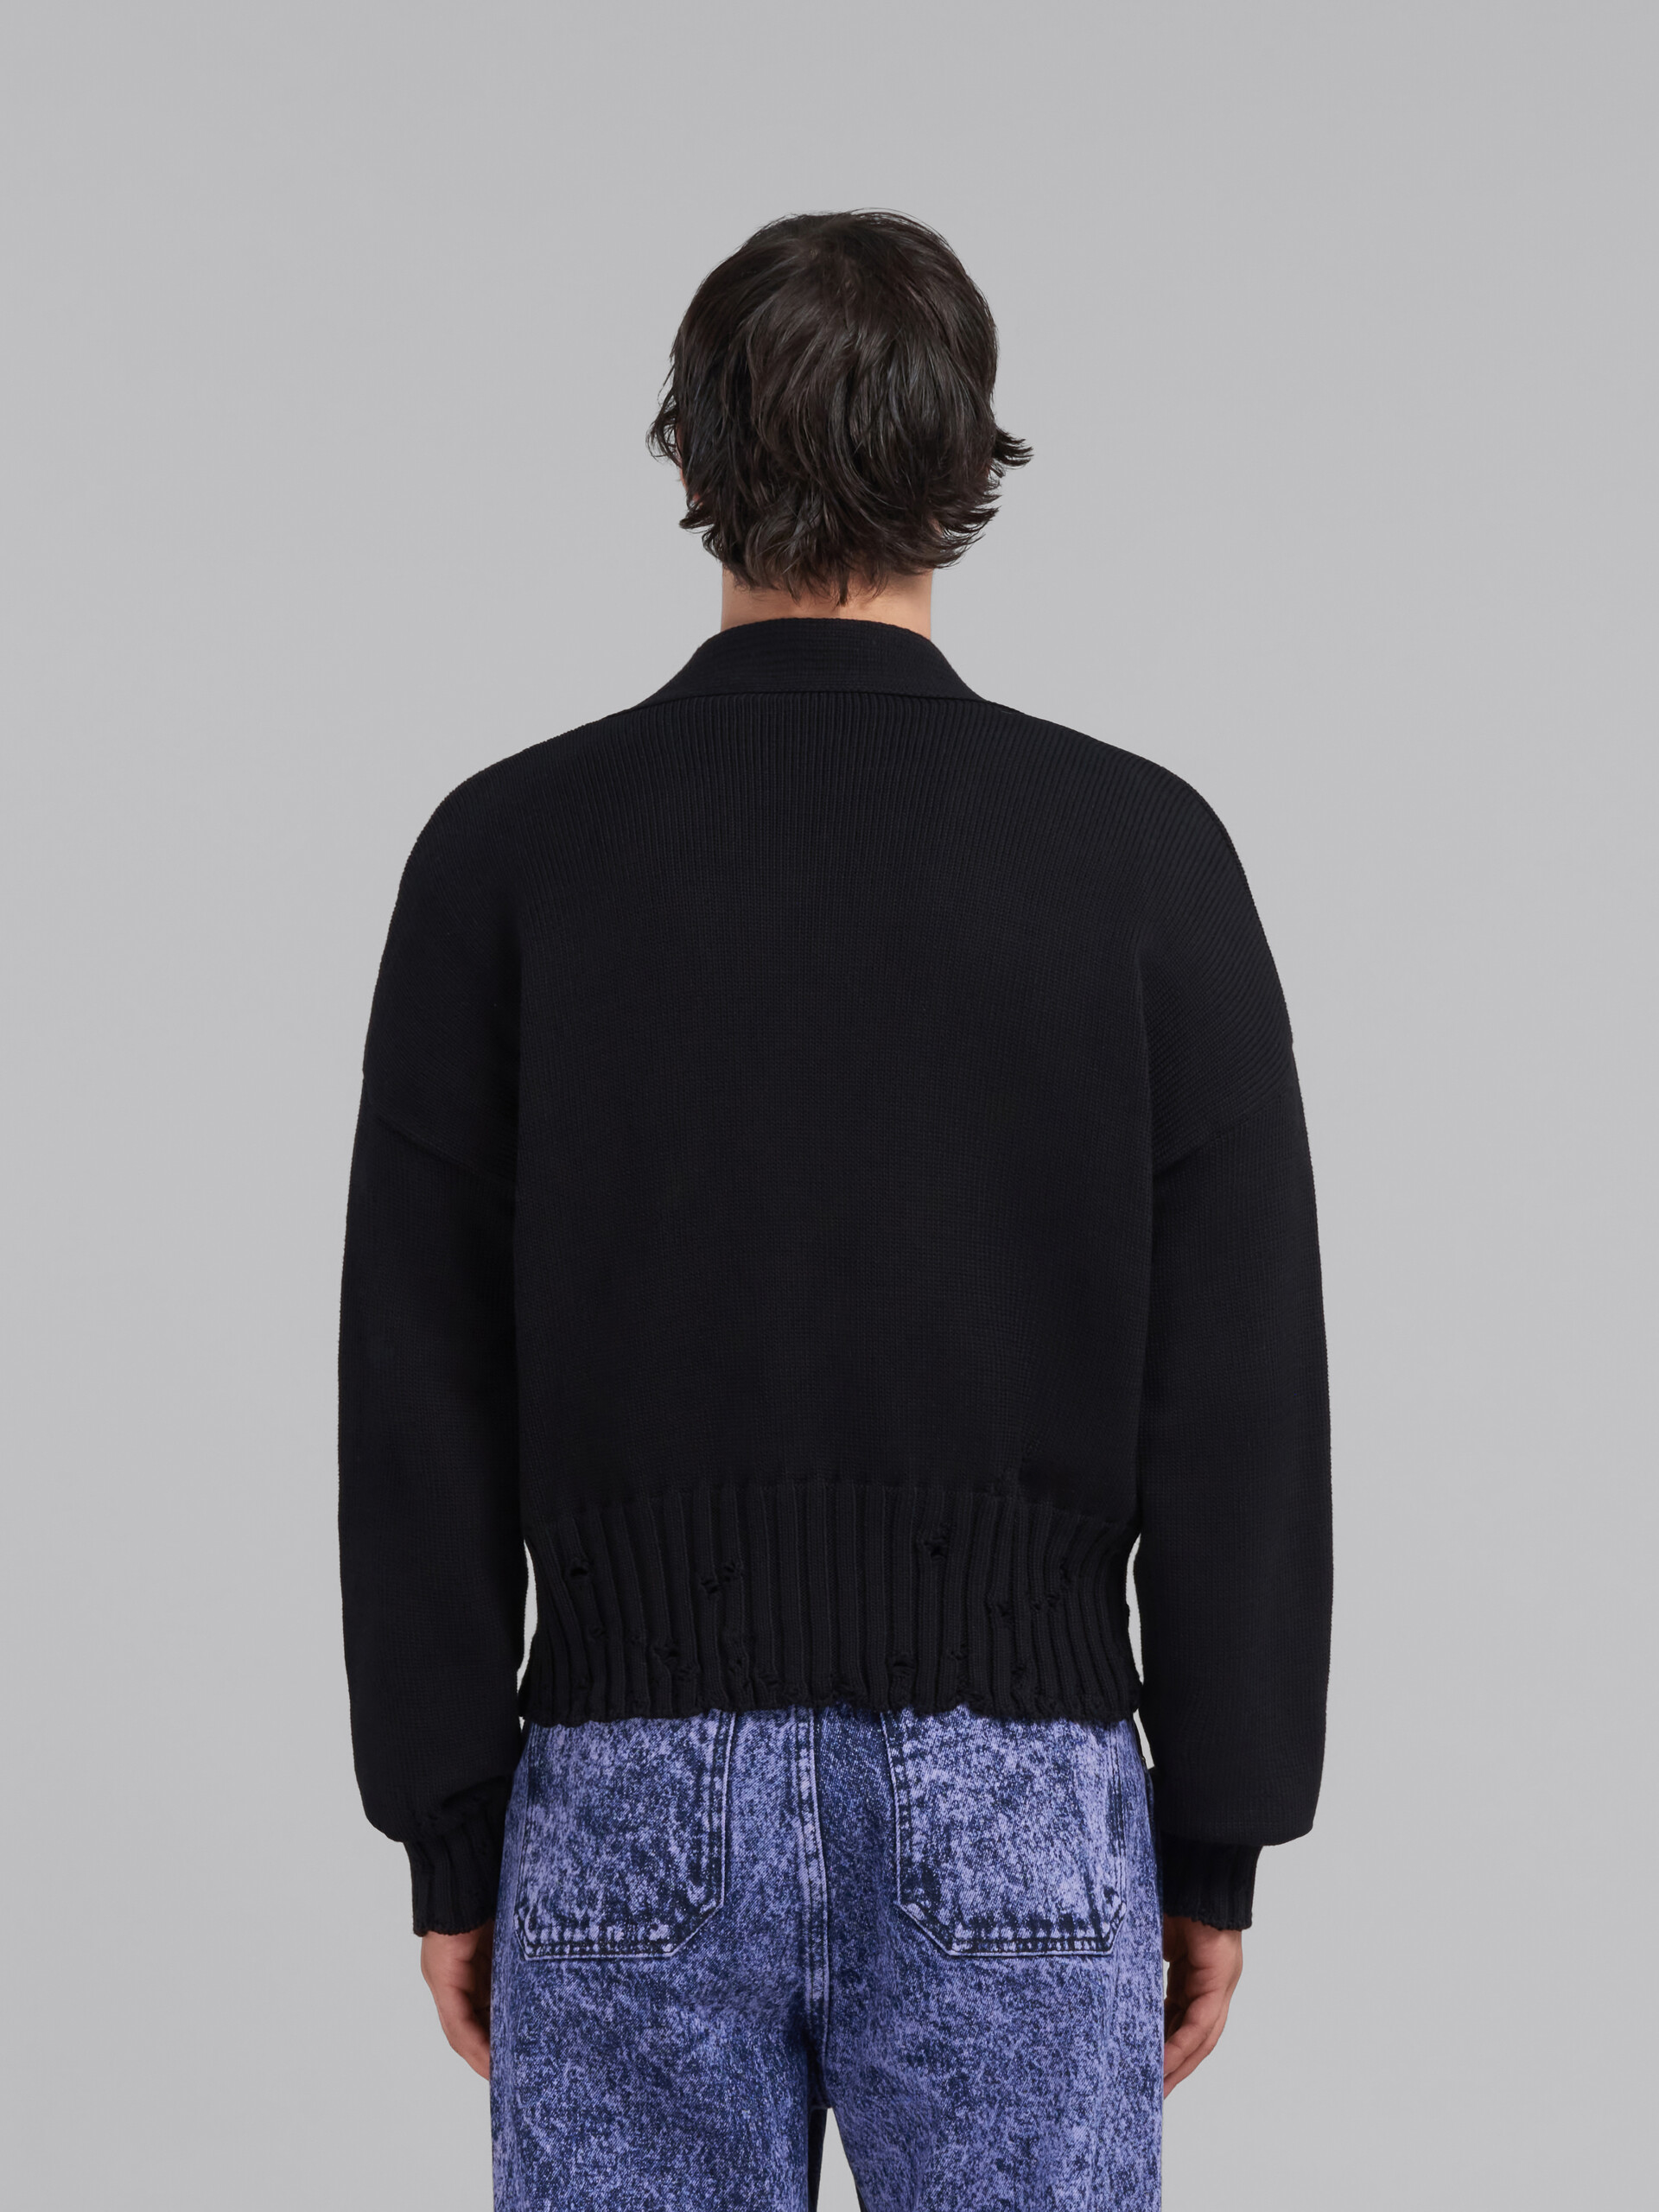 Black dishevelled cotton cardigan - Pullovers - Image 3